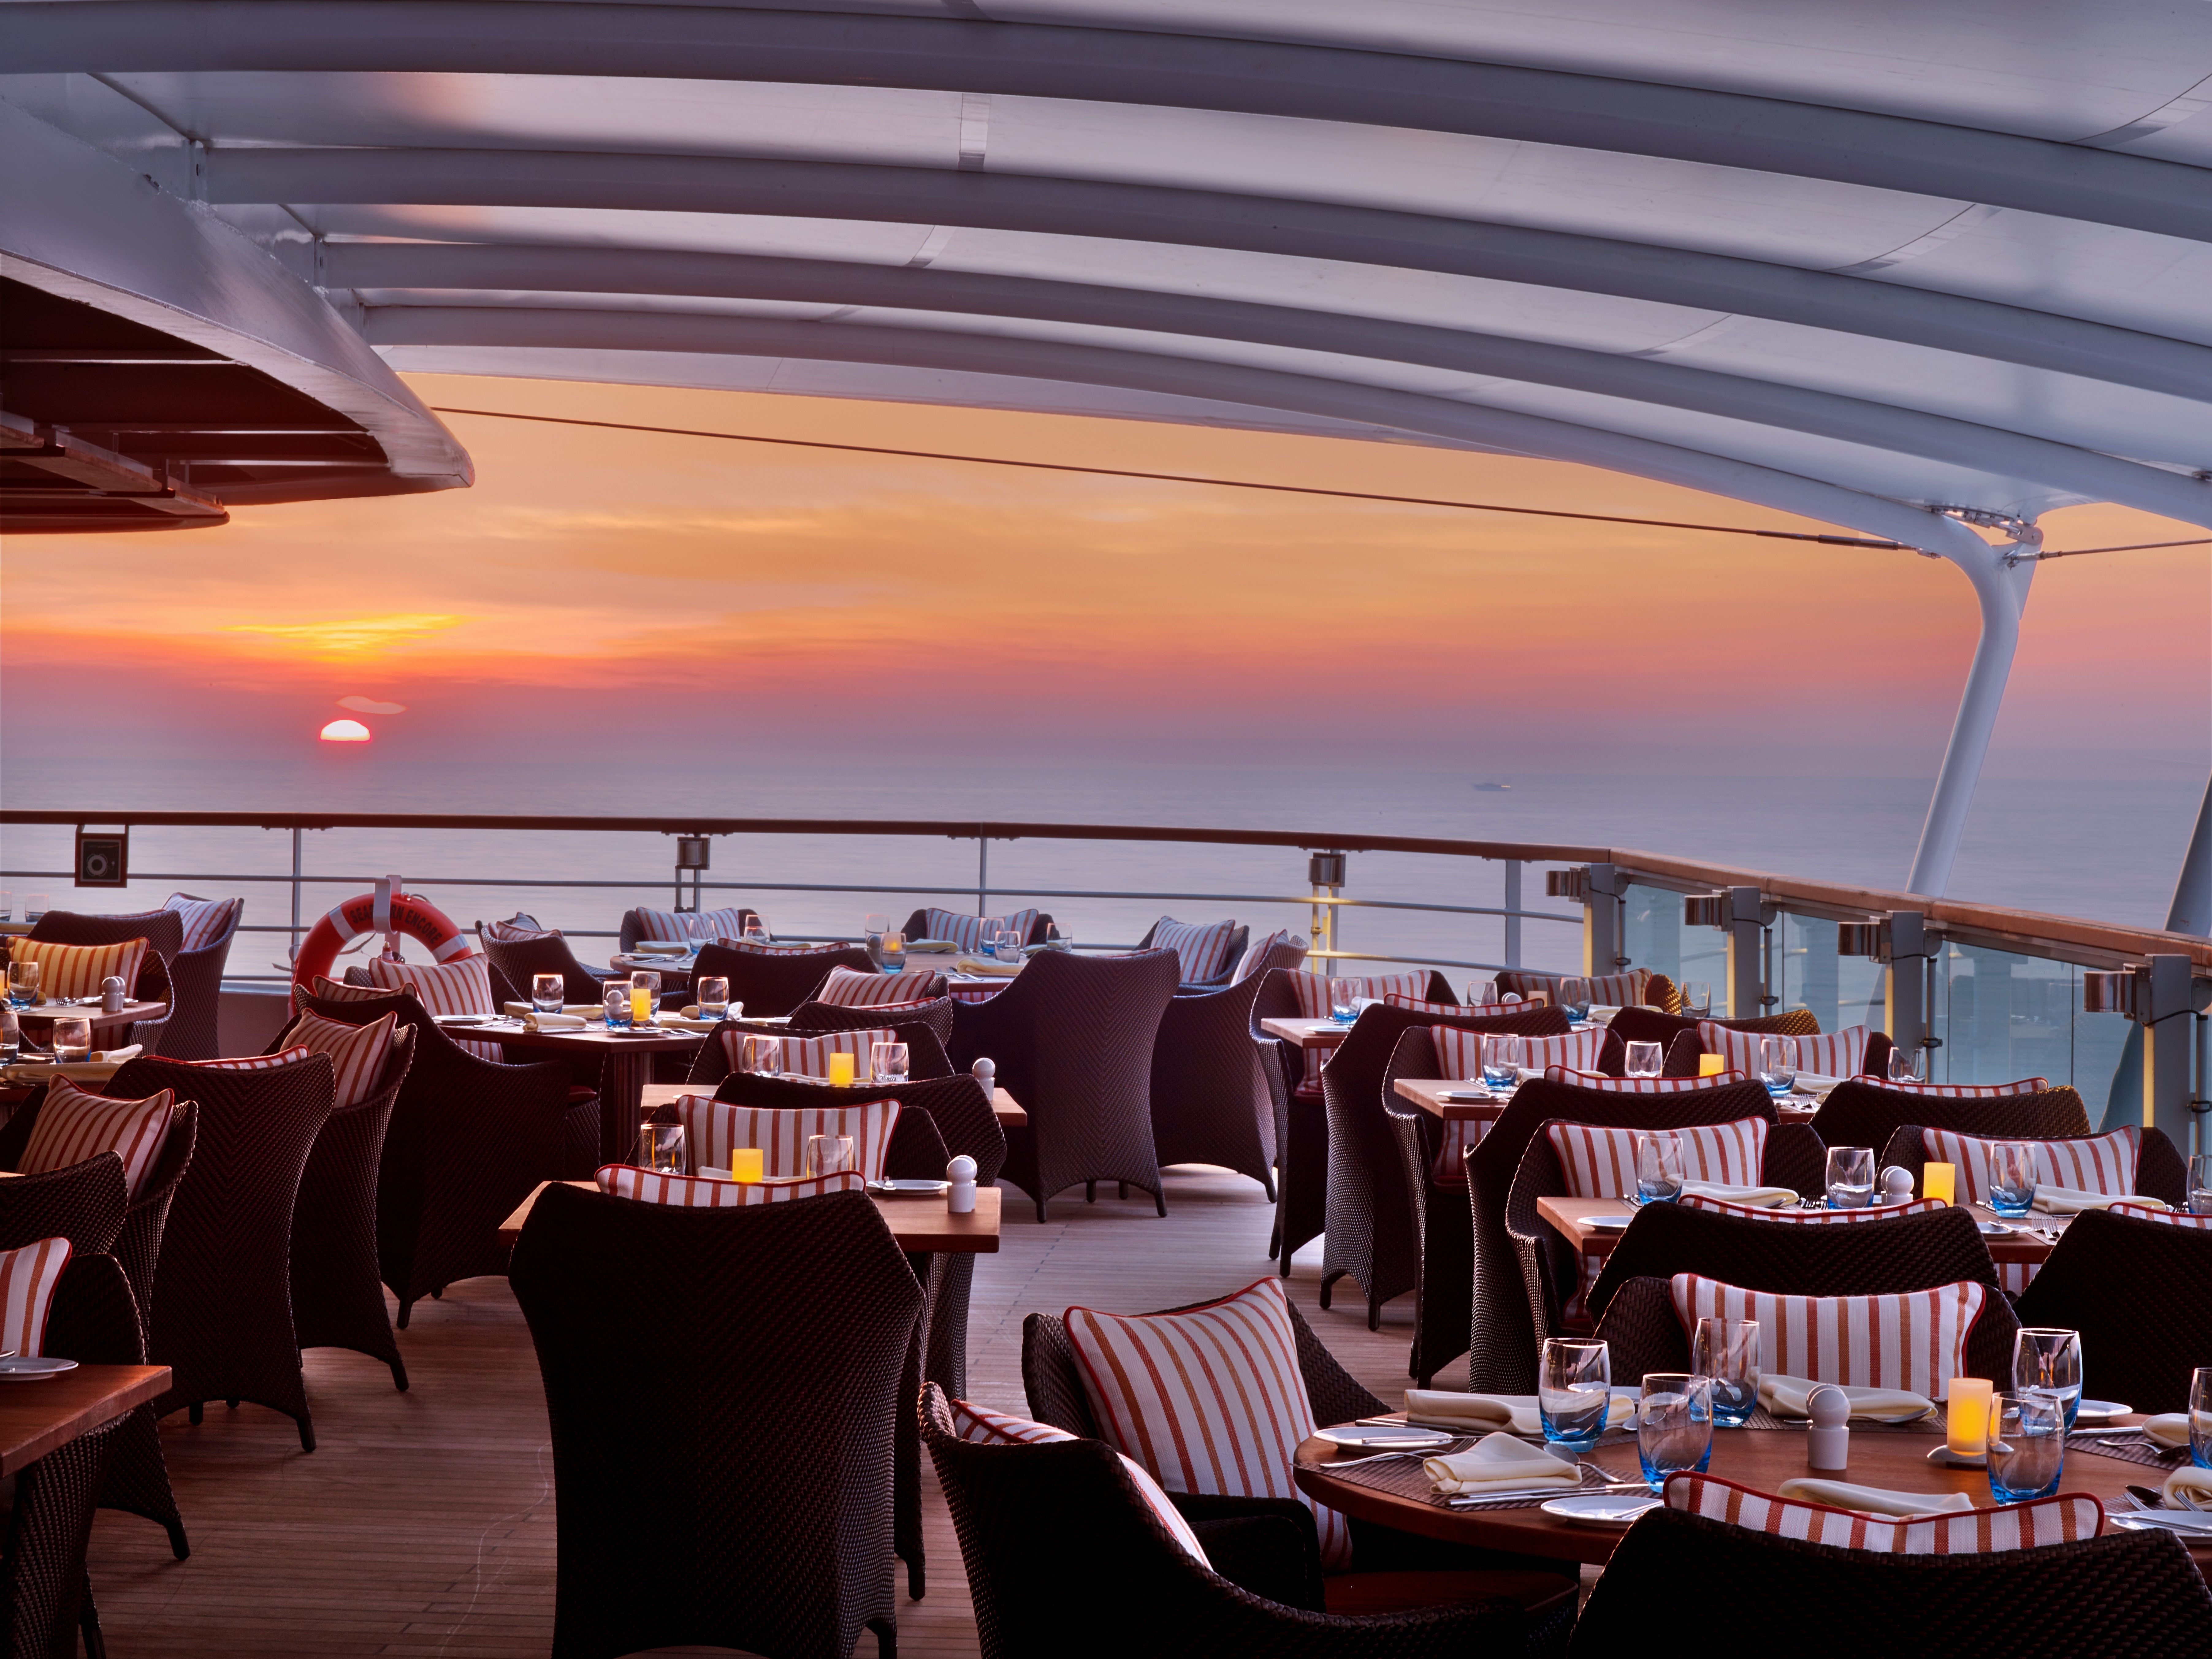 Scenic cruise ship deck dining area at sunset, offering ocean views and comfortable seating.